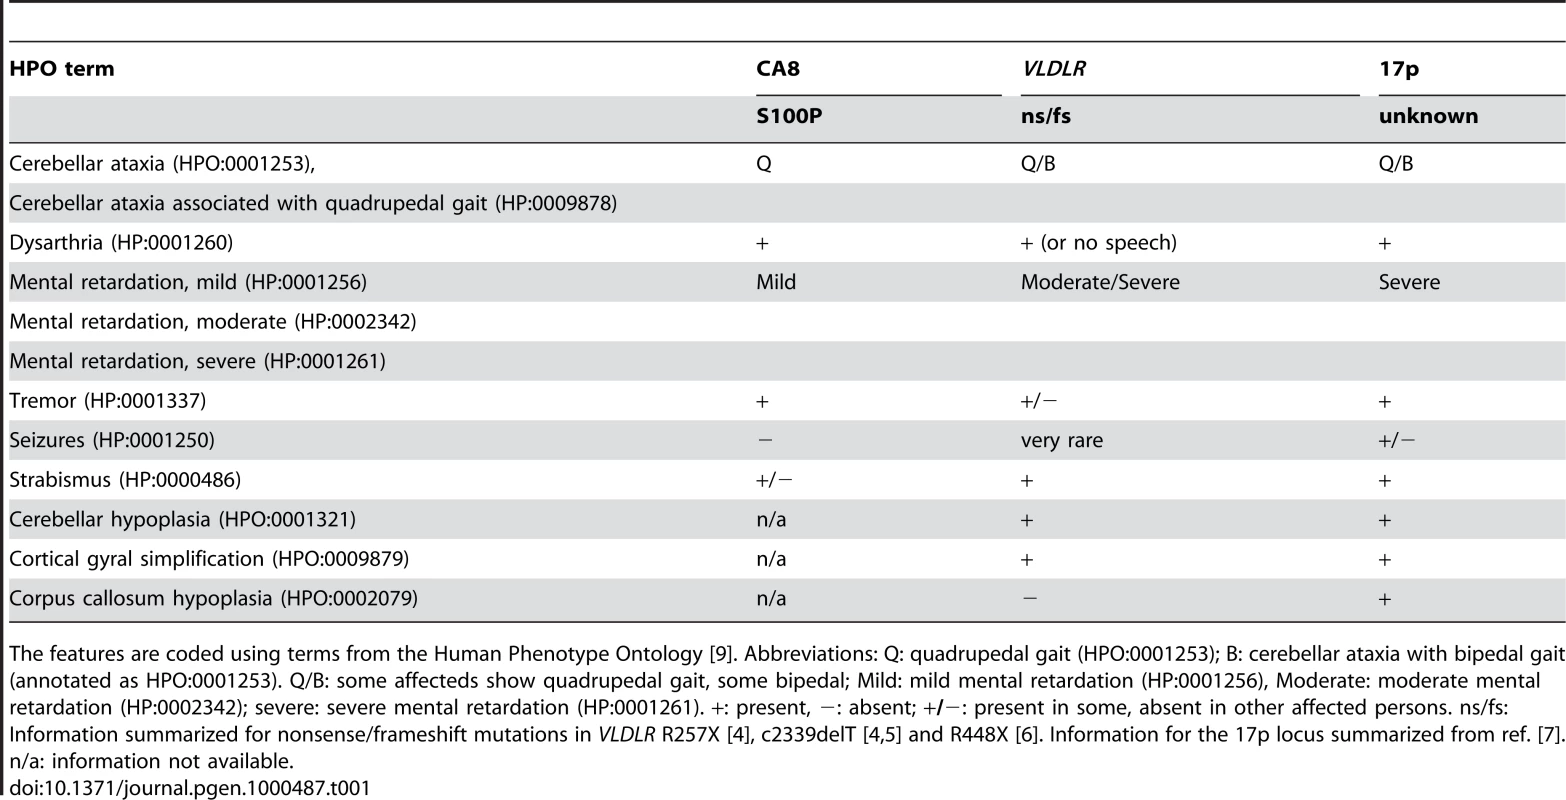 Clinical features of the affected persons of the family presented in this work and summary of features found related to mutations in <i>VLDLR</i> and at a locus on chromosome 17p.